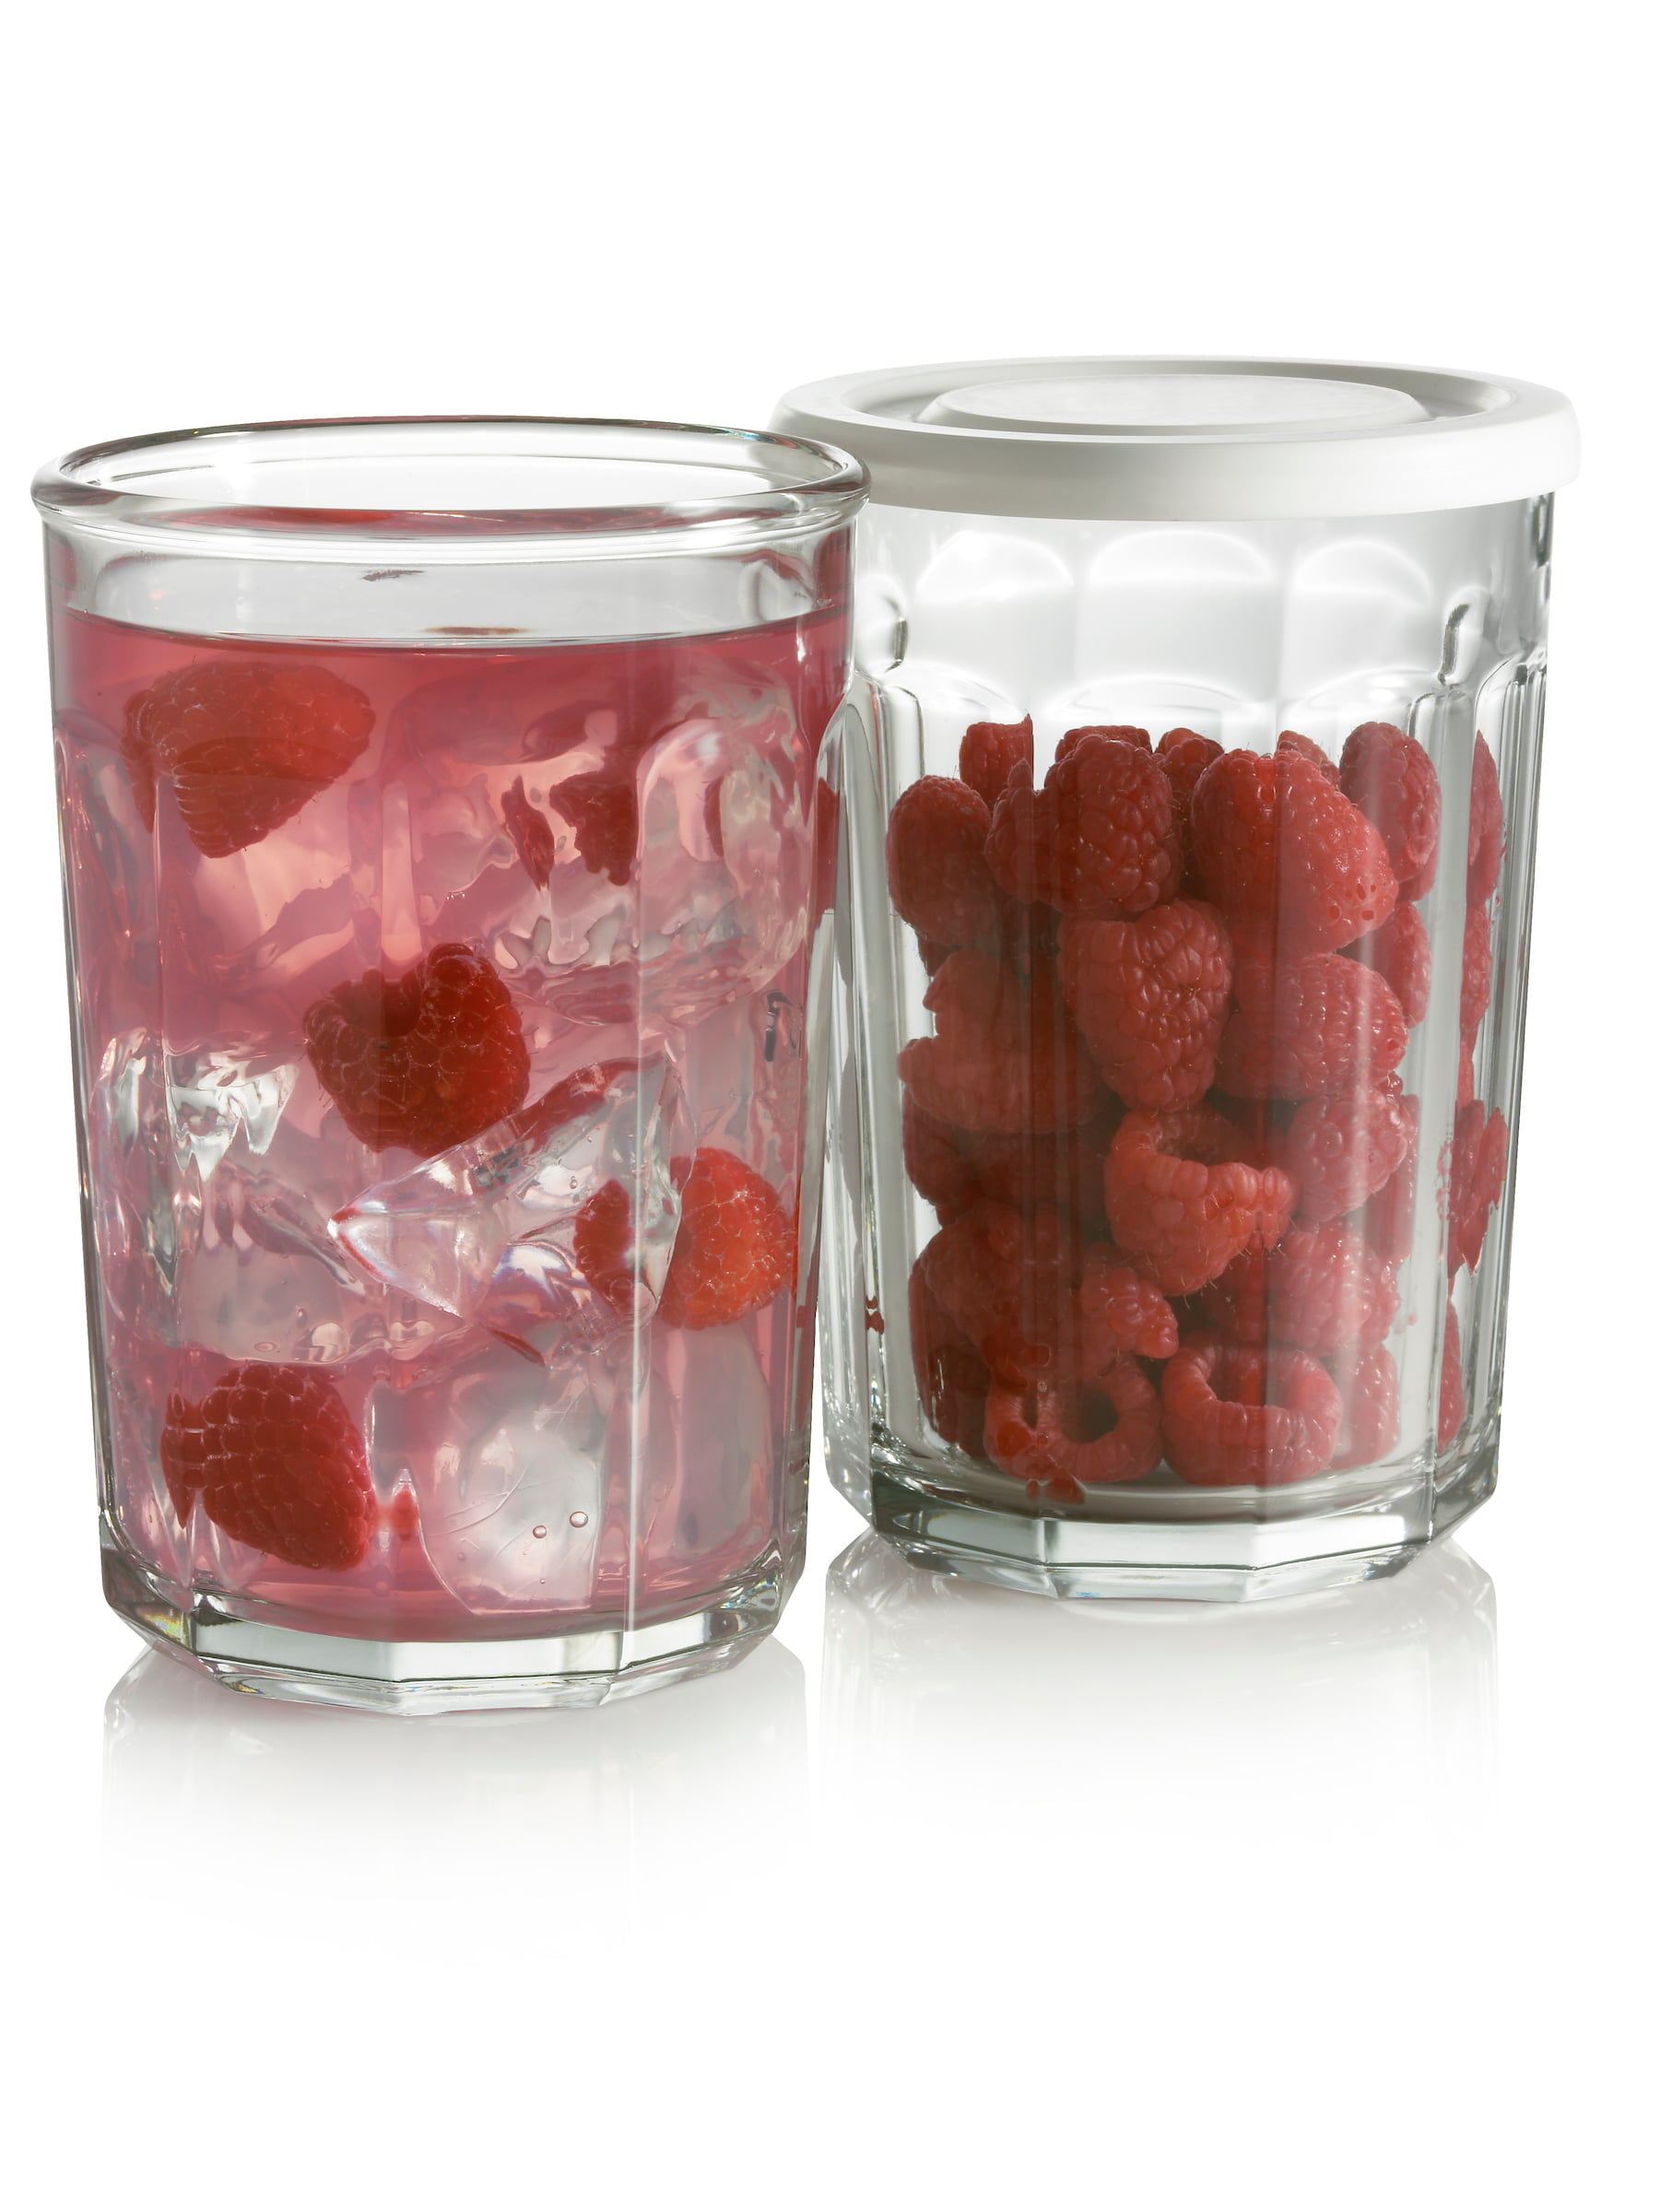 Luminarc Working 14 oz. Glass Storage Jar and Cooler with White